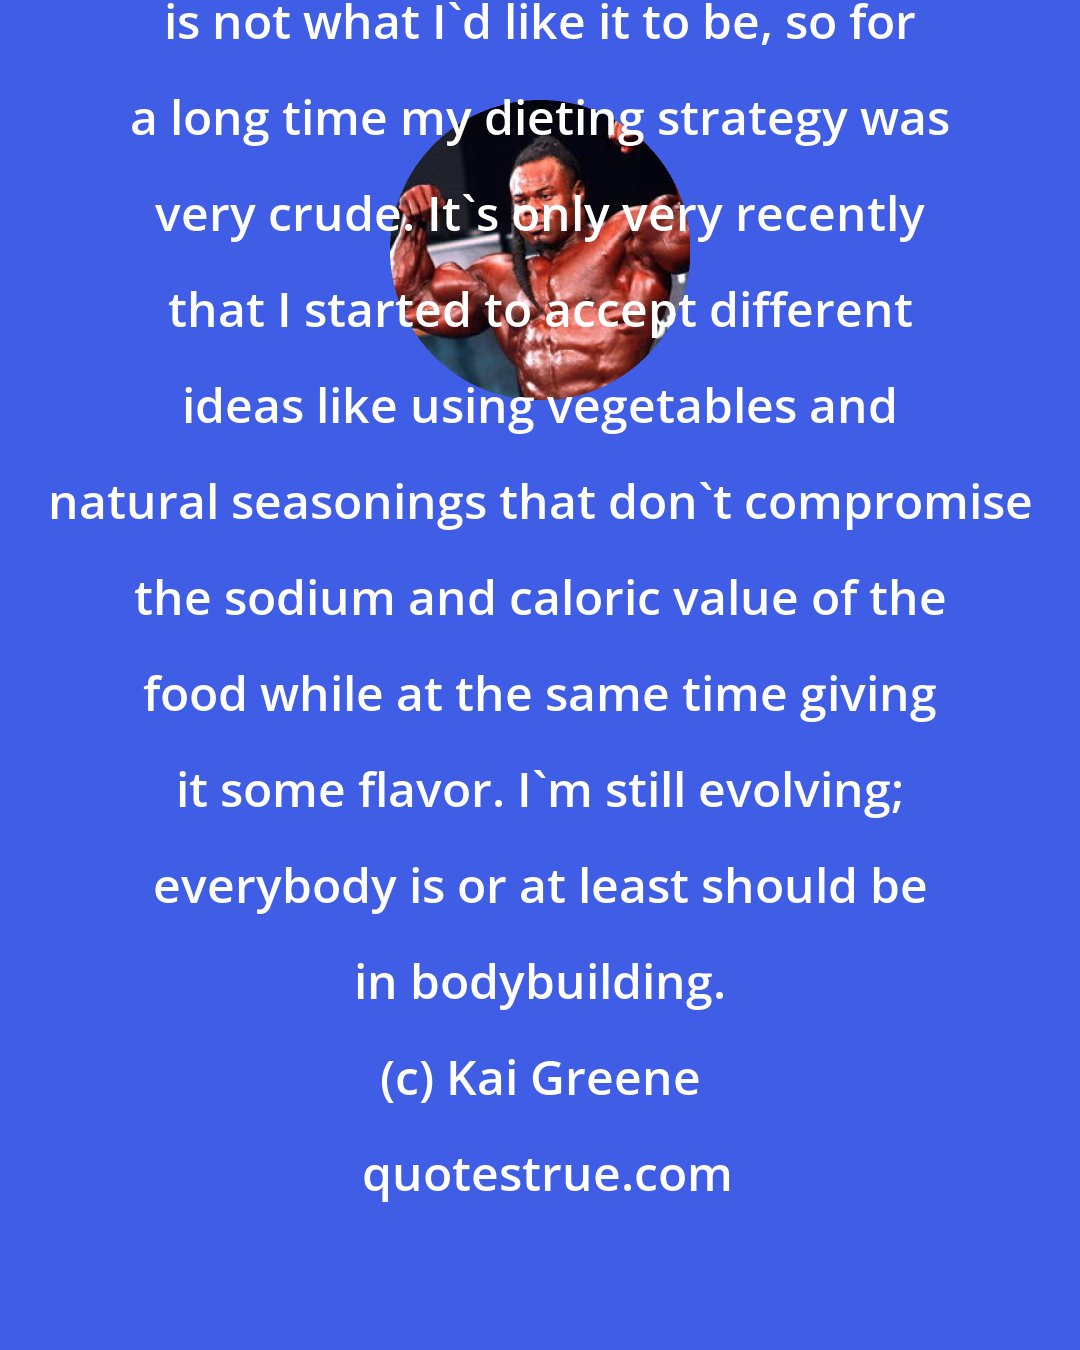 Kai Greene: My understanding about nutrition is not what I'd like it to be, so for a long time my dieting strategy was very crude. It's only very recently that I started to accept different ideas like using vegetables and natural seasonings that don't compromise the sodium and caloric value of the food while at the same time giving it some flavor. I'm still evolving; everybody is or at least should be in bodybuilding.